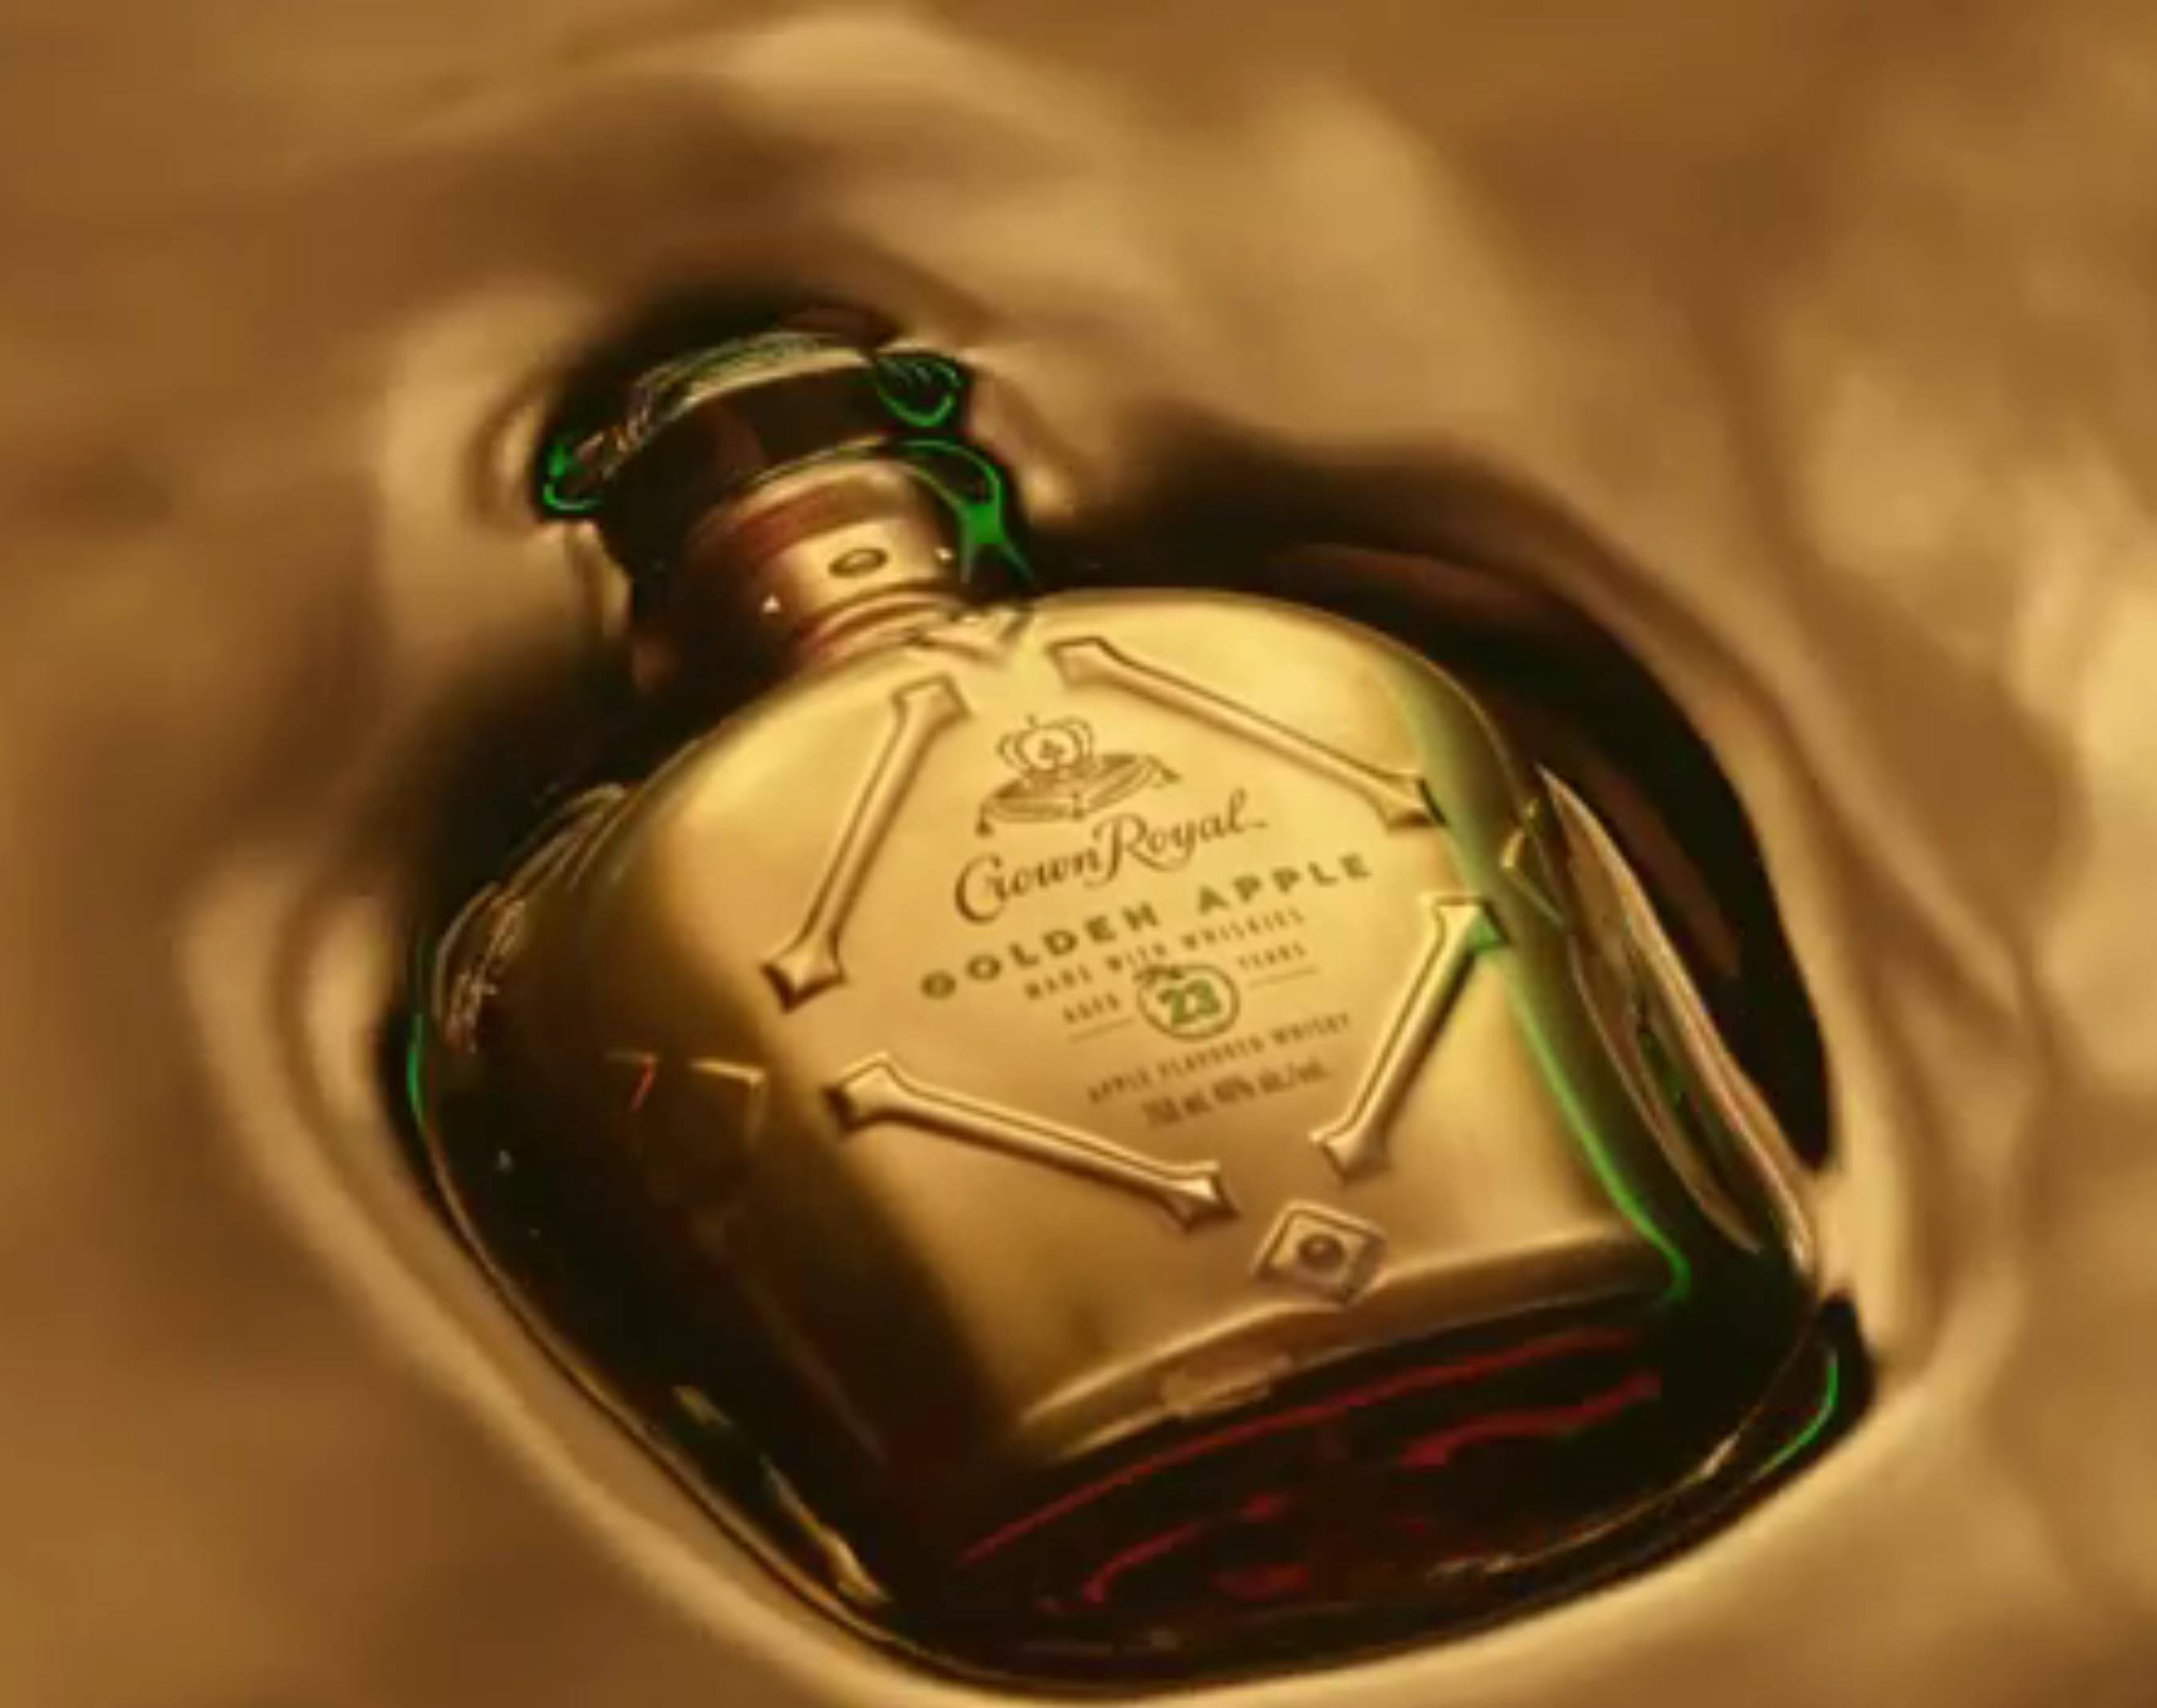 With the launch of Crown Royal Golden Apple, the brand is providing a new flavored luxury offering that will challenge the conventional luxury category and revolutionize the way consumers think about prestige whisky.